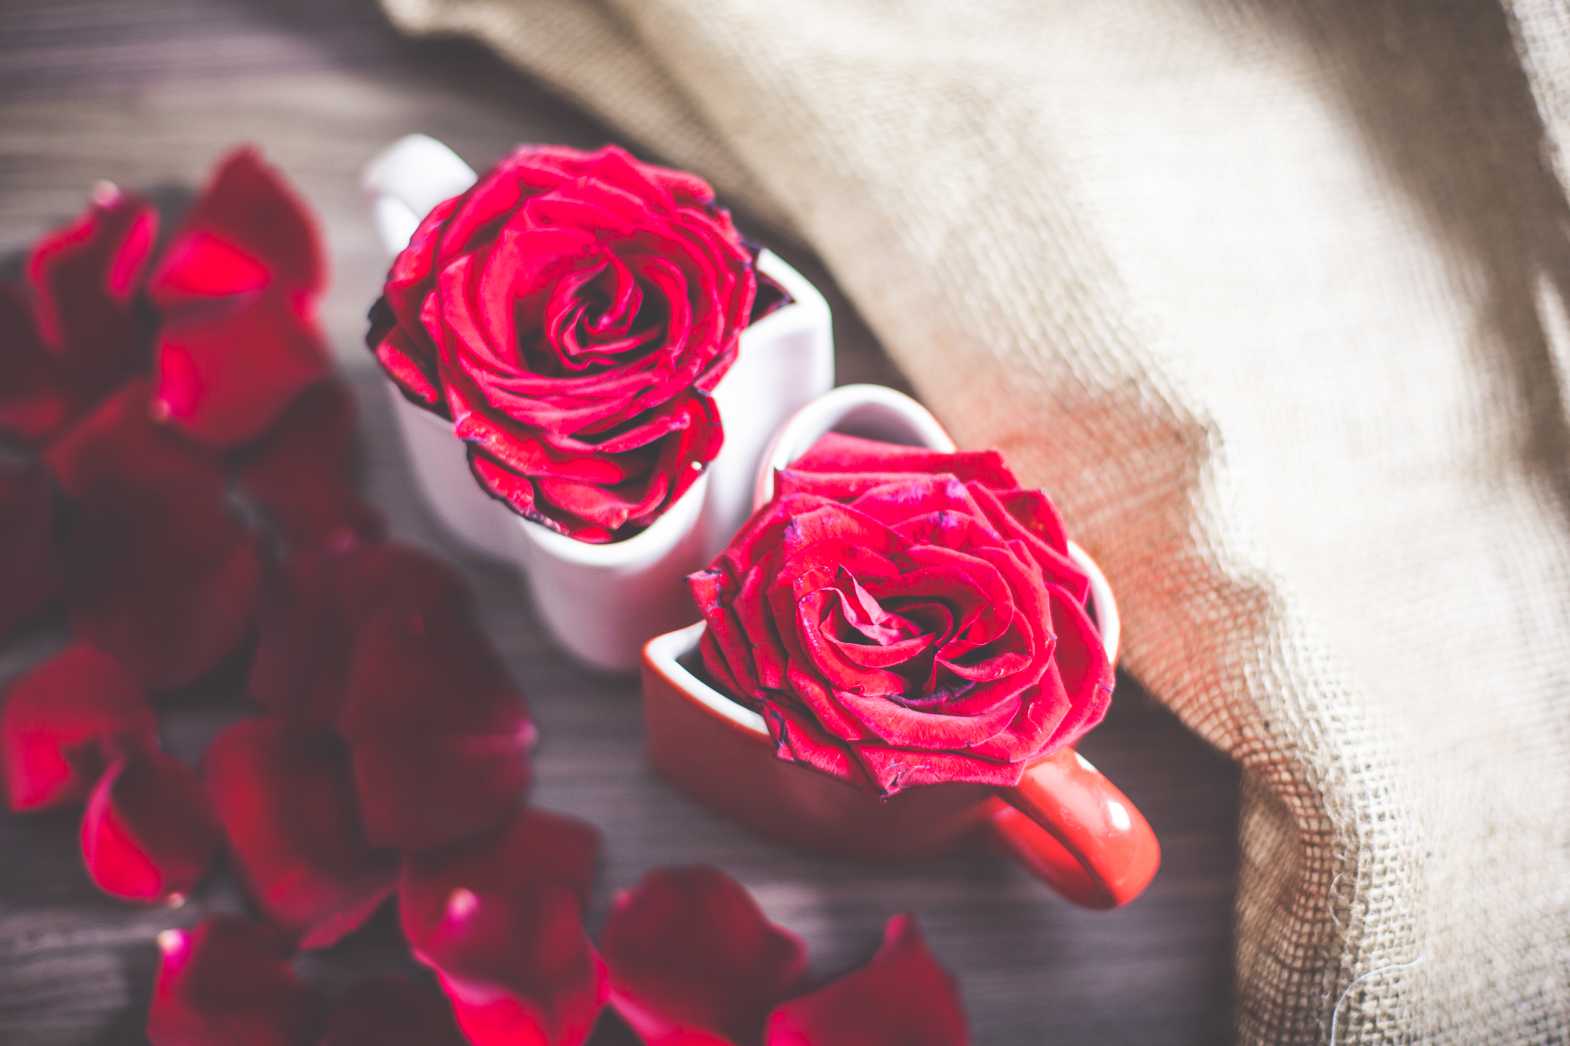 Free stock photo of Love Heart Coffee Cups with Roses and Rose Leafs from picjumbo.com